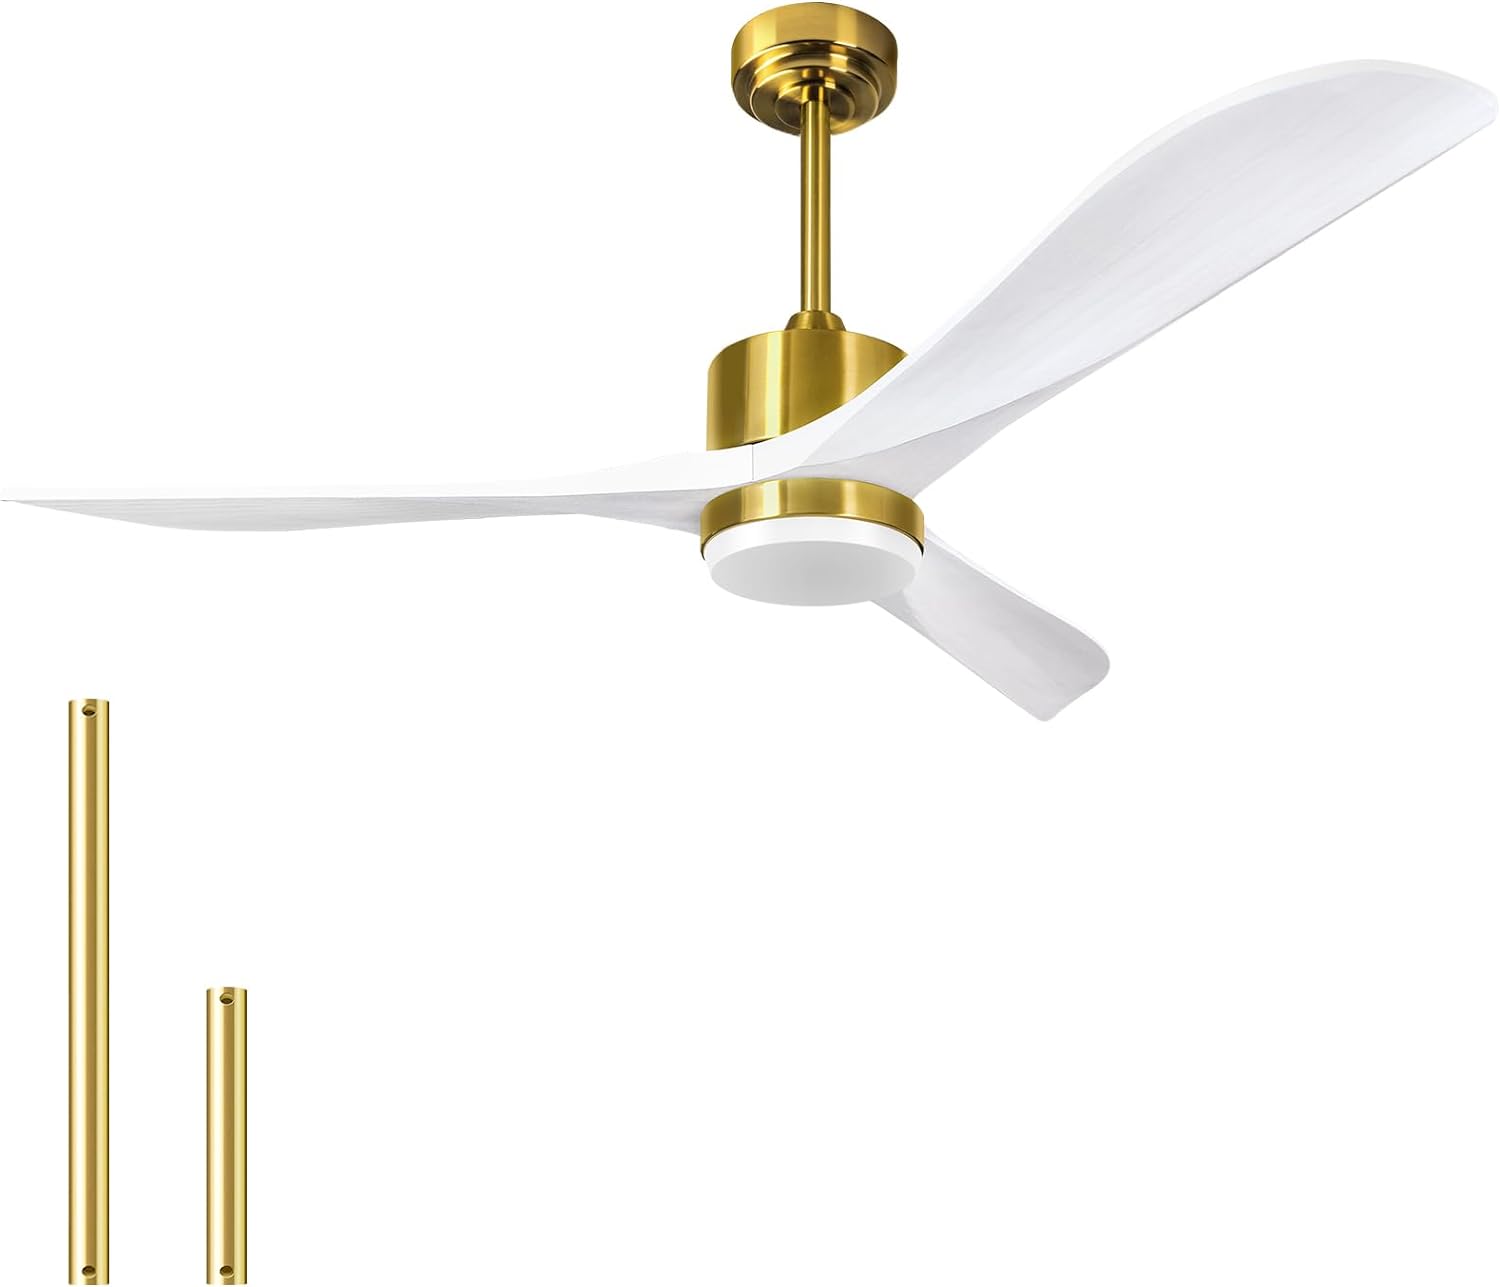 56Inch Gold and White Ceiling Fans with Lights Remote, 56 Indoor Outdoor Wood Ceiling Fan with Light, High CFM, Noiseless Reversible